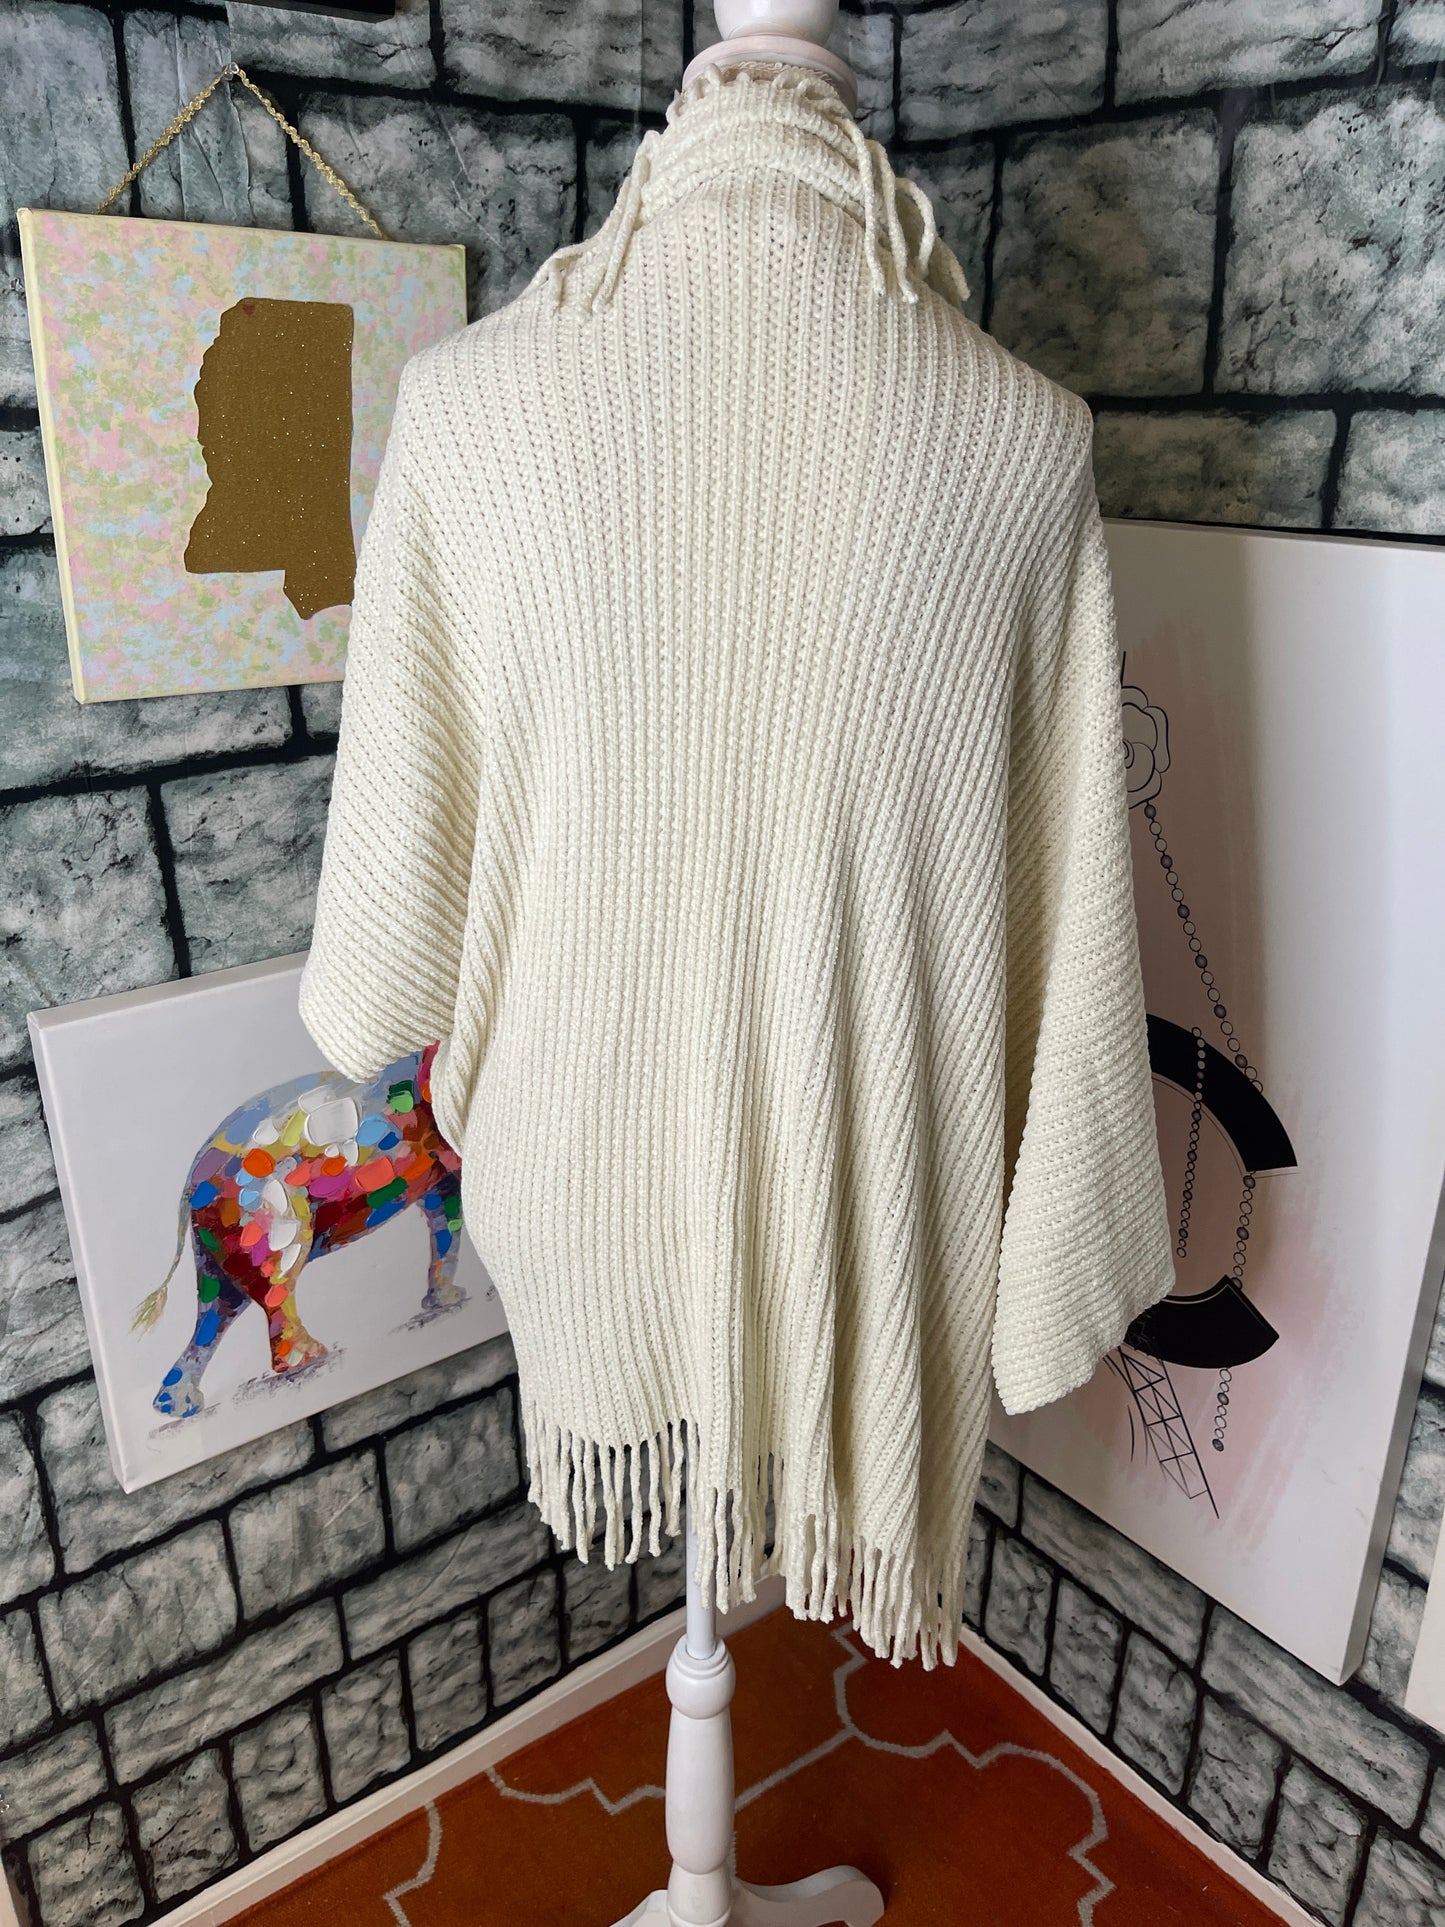 NEW Ruggine Off White Fringe Wrap Women sz One Size (would say fits up to Large)